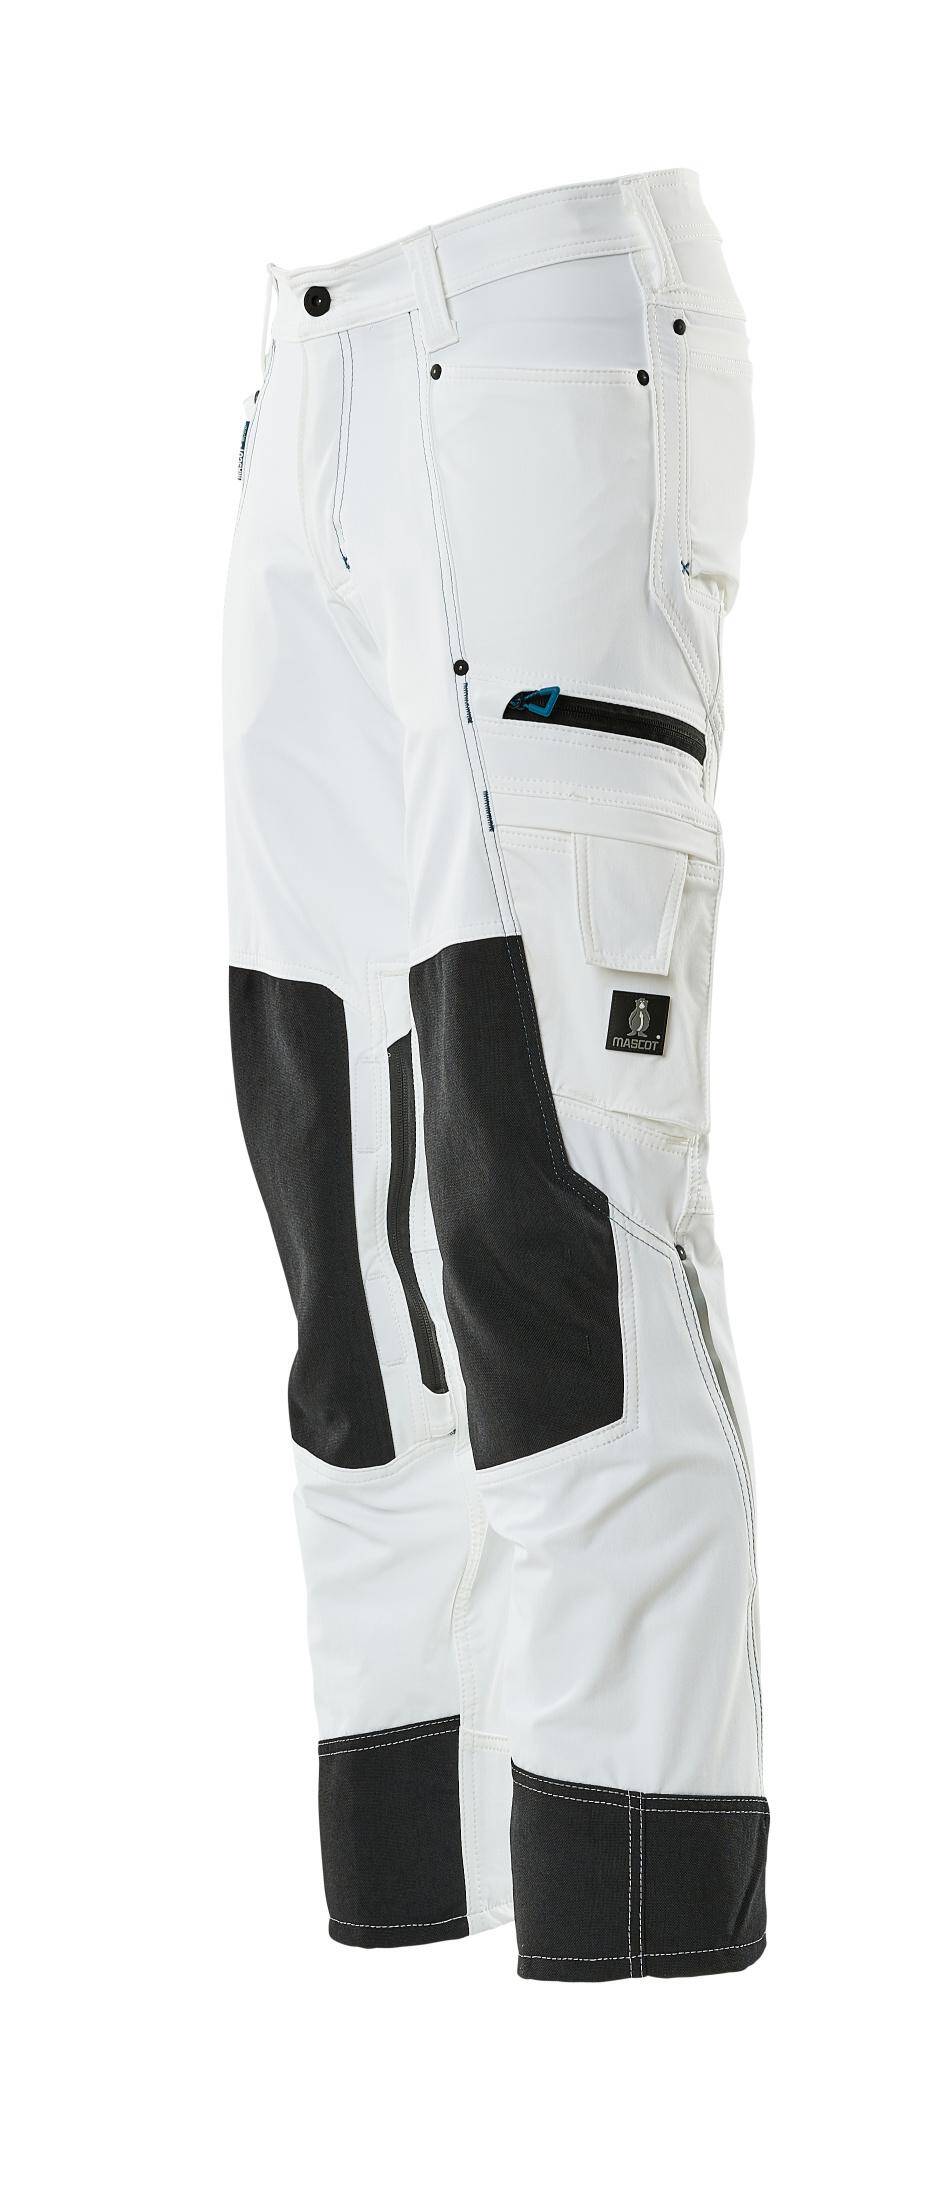 Trousers with kneepad pockets Advanced white